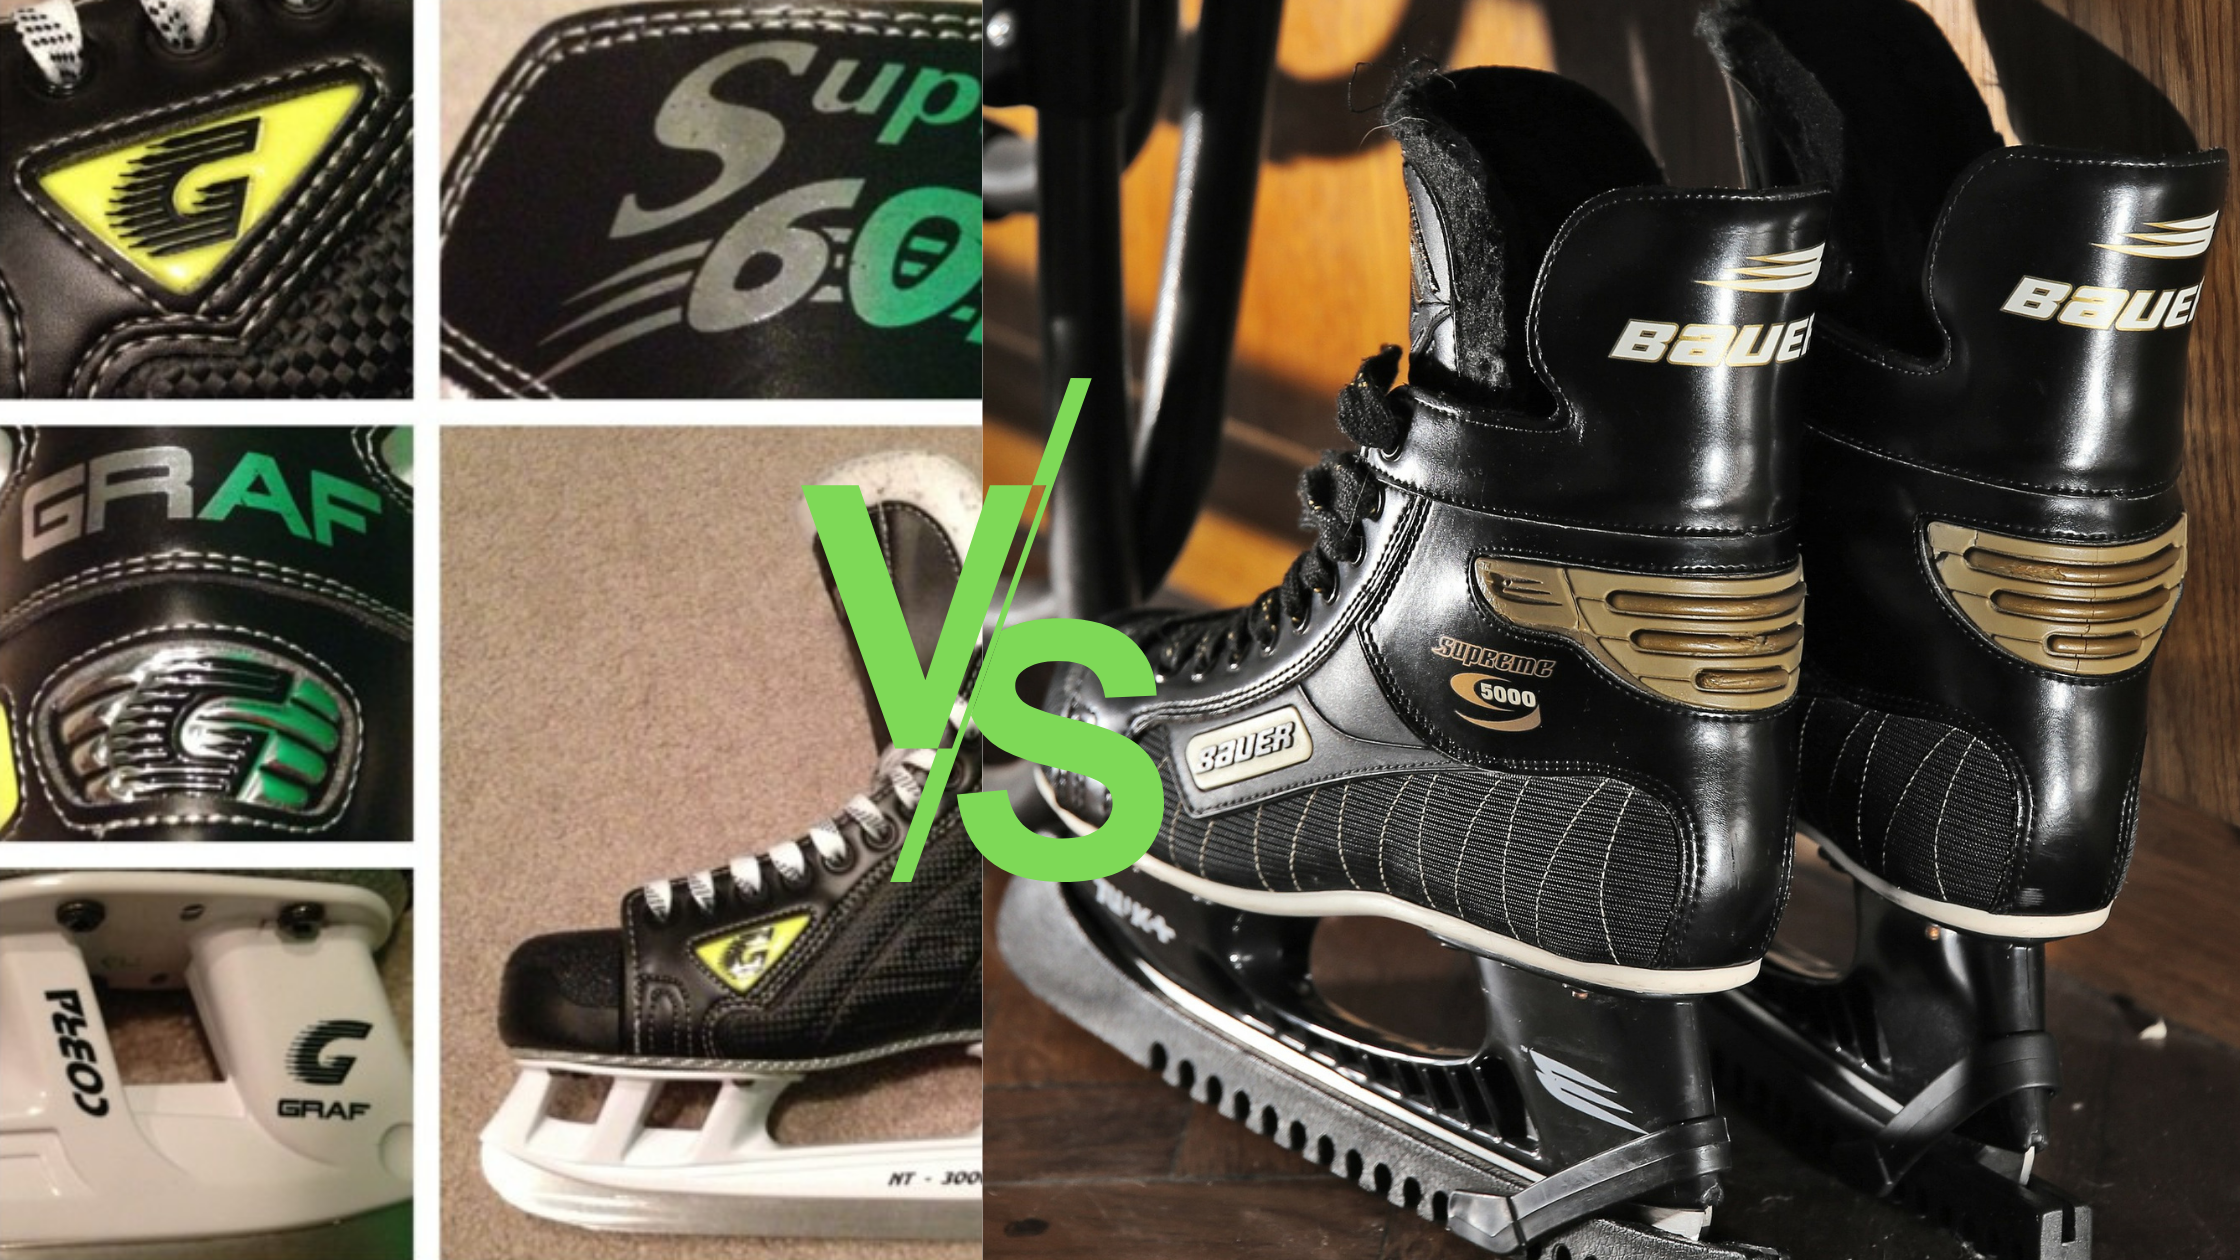 Graf Vs Bauer: Which Brand Is Better?